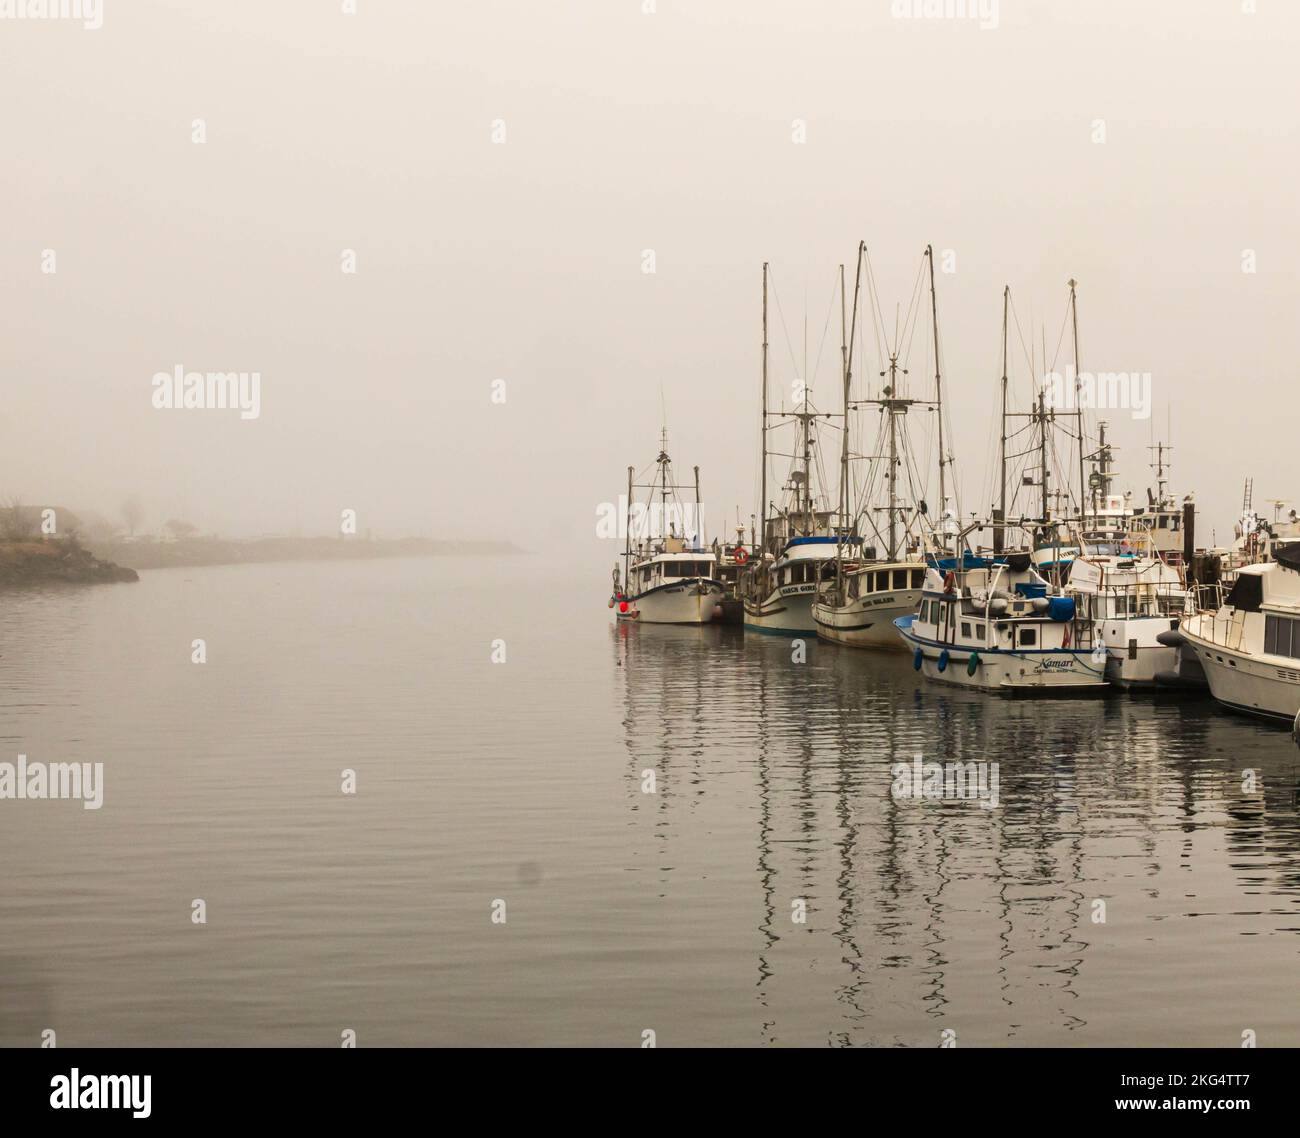 Foggy, moody waterfront  scene with fish boats at dock and breakwater fading into the distance.  Room for words.  Grey sky, grey water. Stock Photo